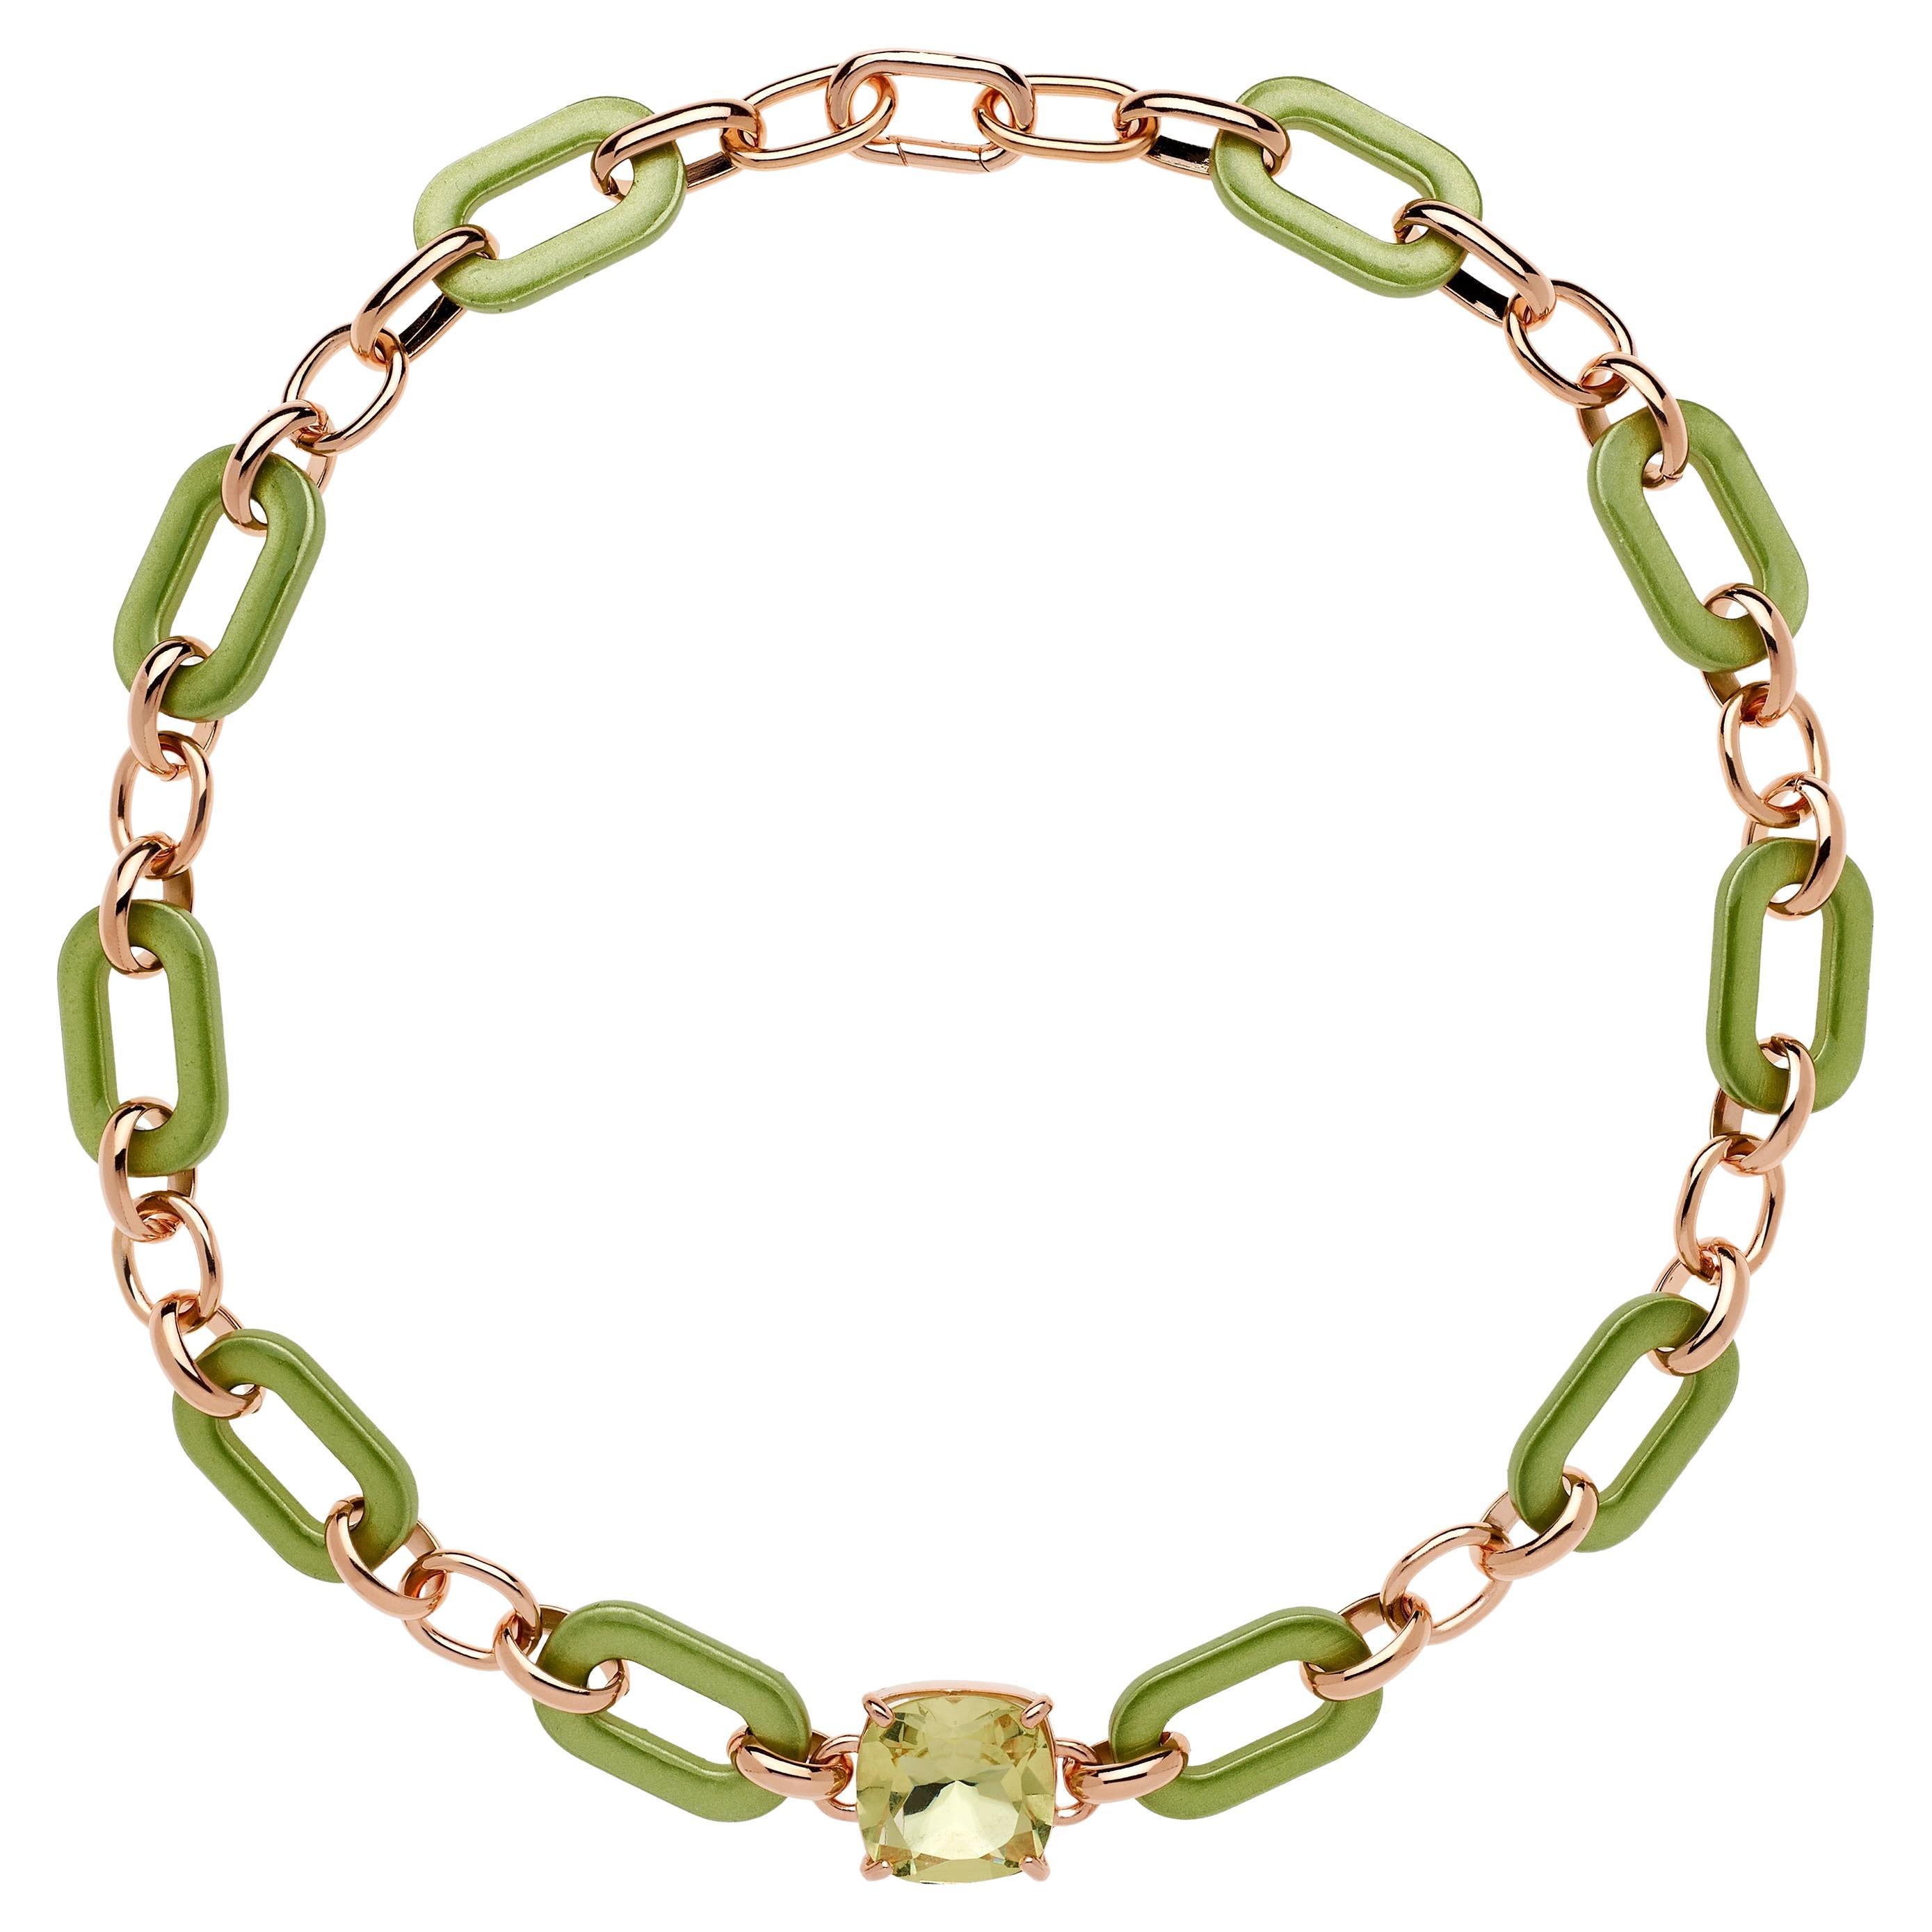 Rossoprezioso Chain Choker in Lacquered and Enameled Wood + Quartz Cushion Cut For Sale